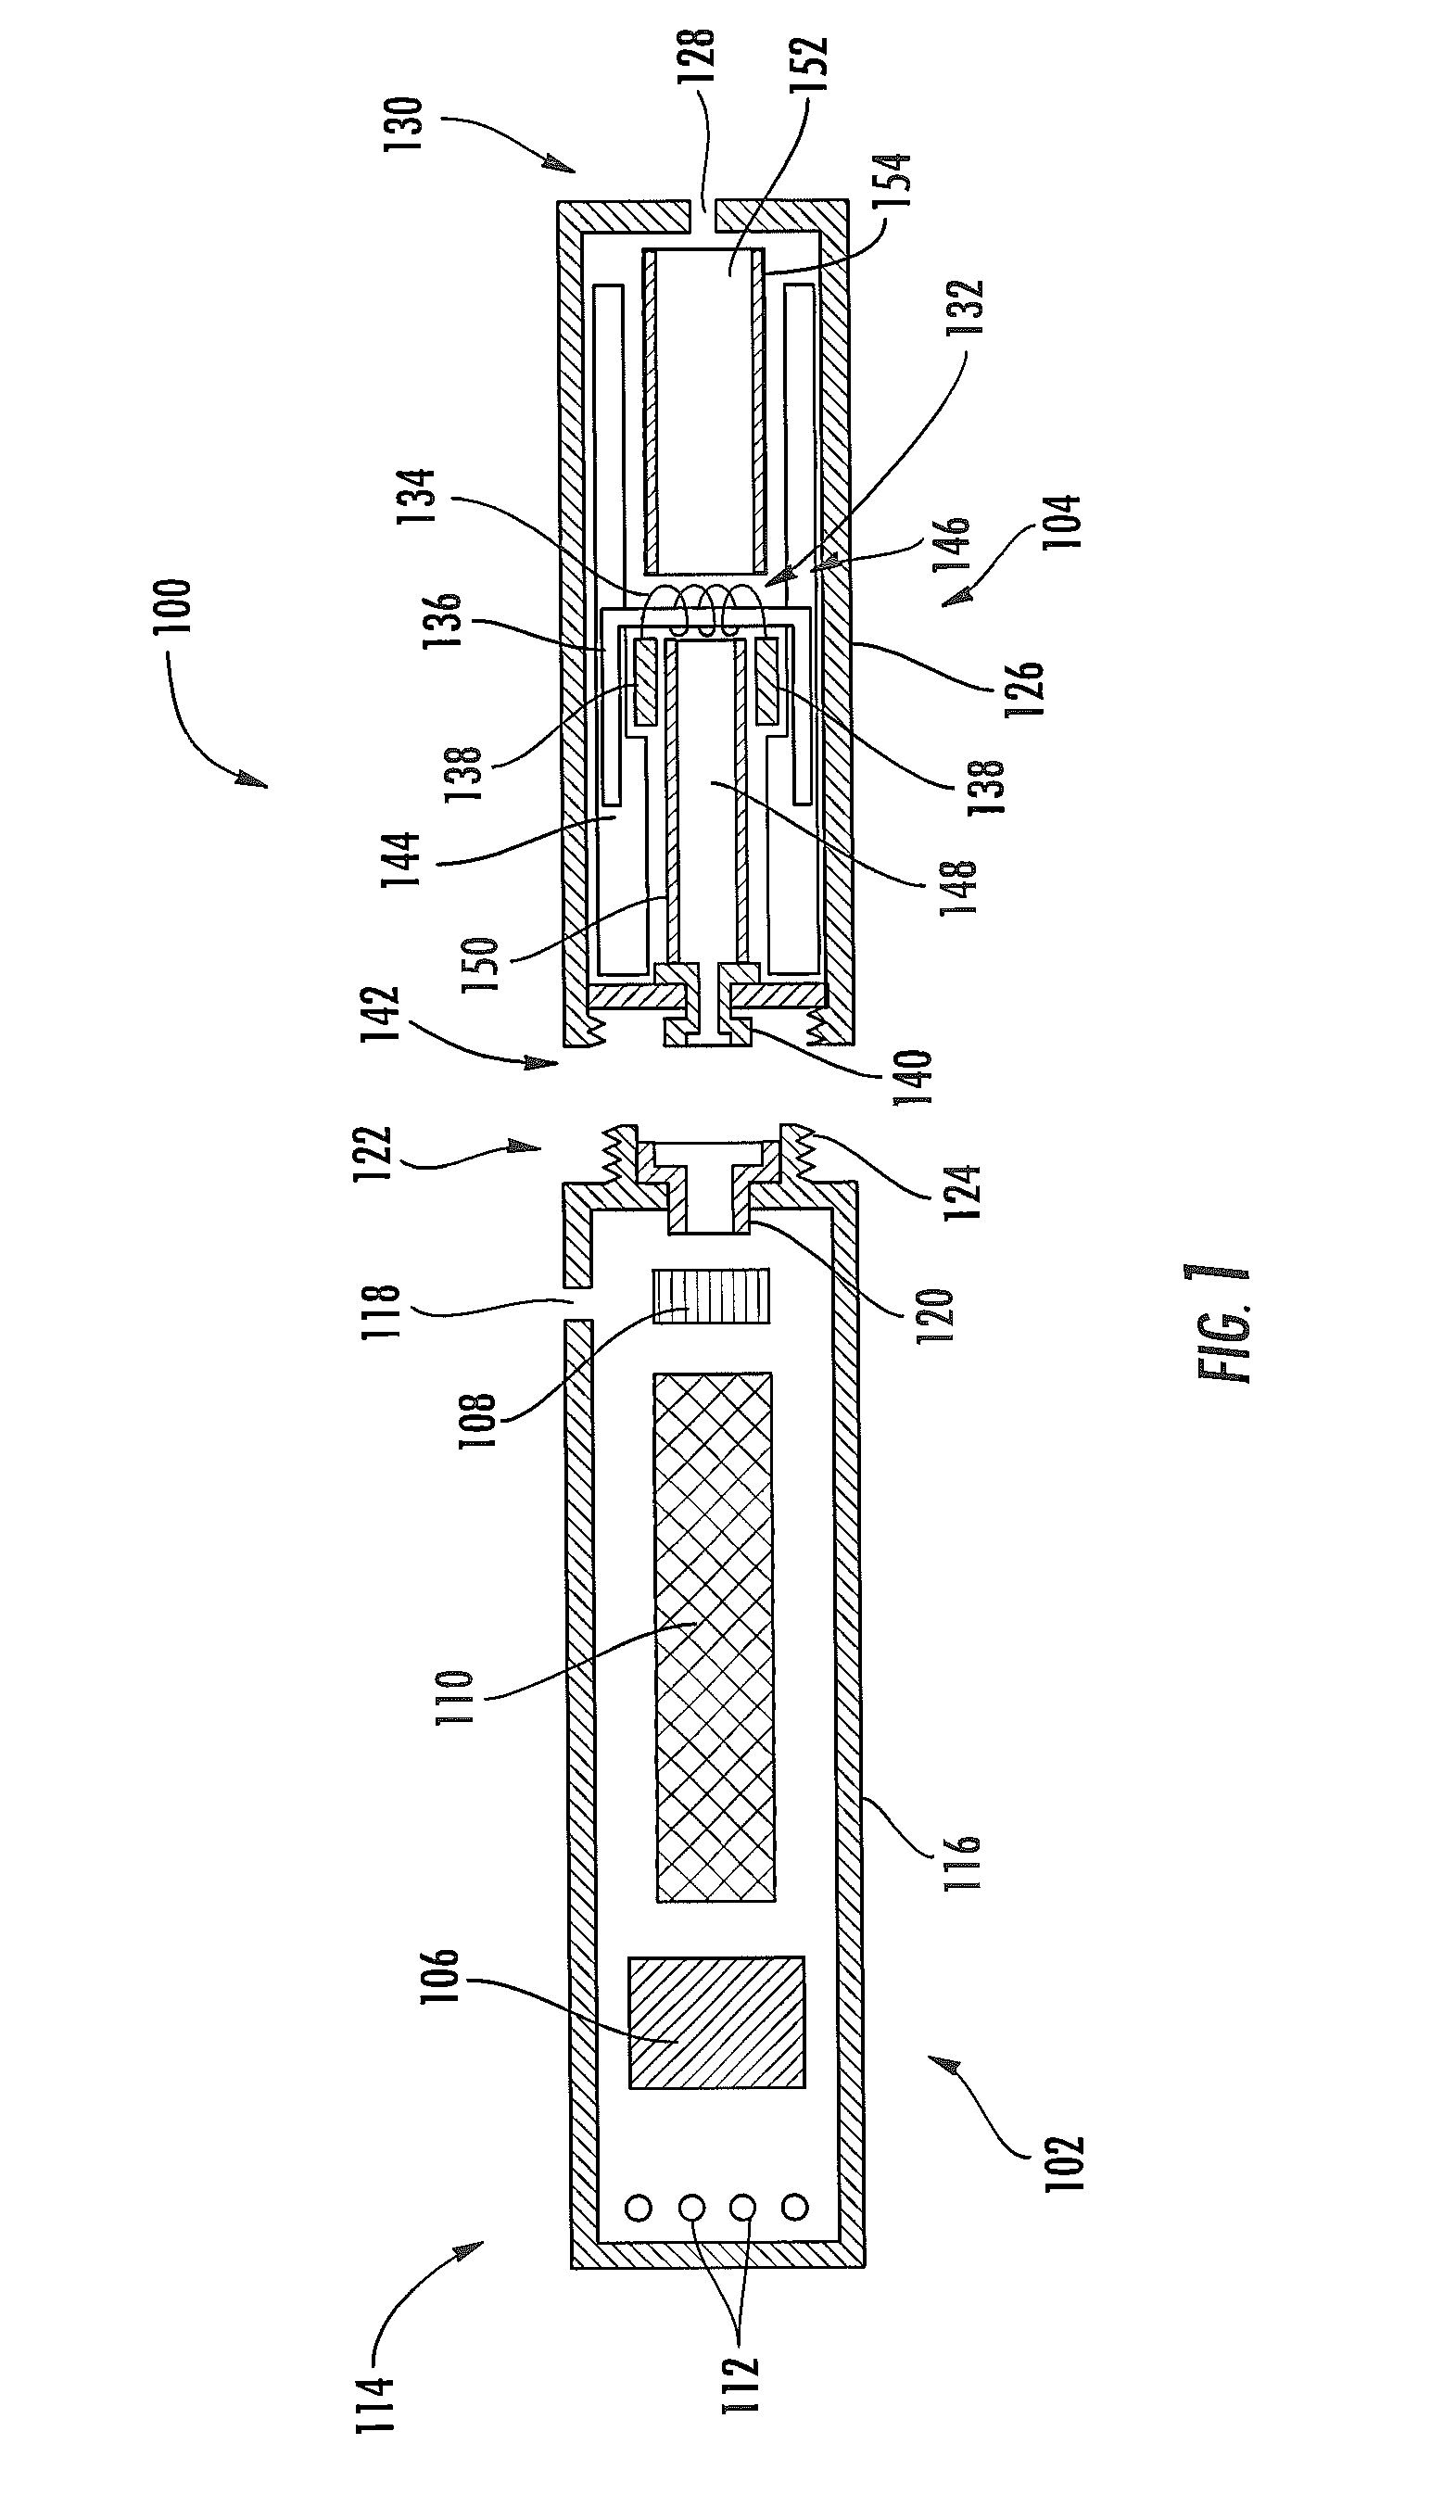 Cartridge for an aerosol delivery device and method for assembling a cartridge for a smoking article